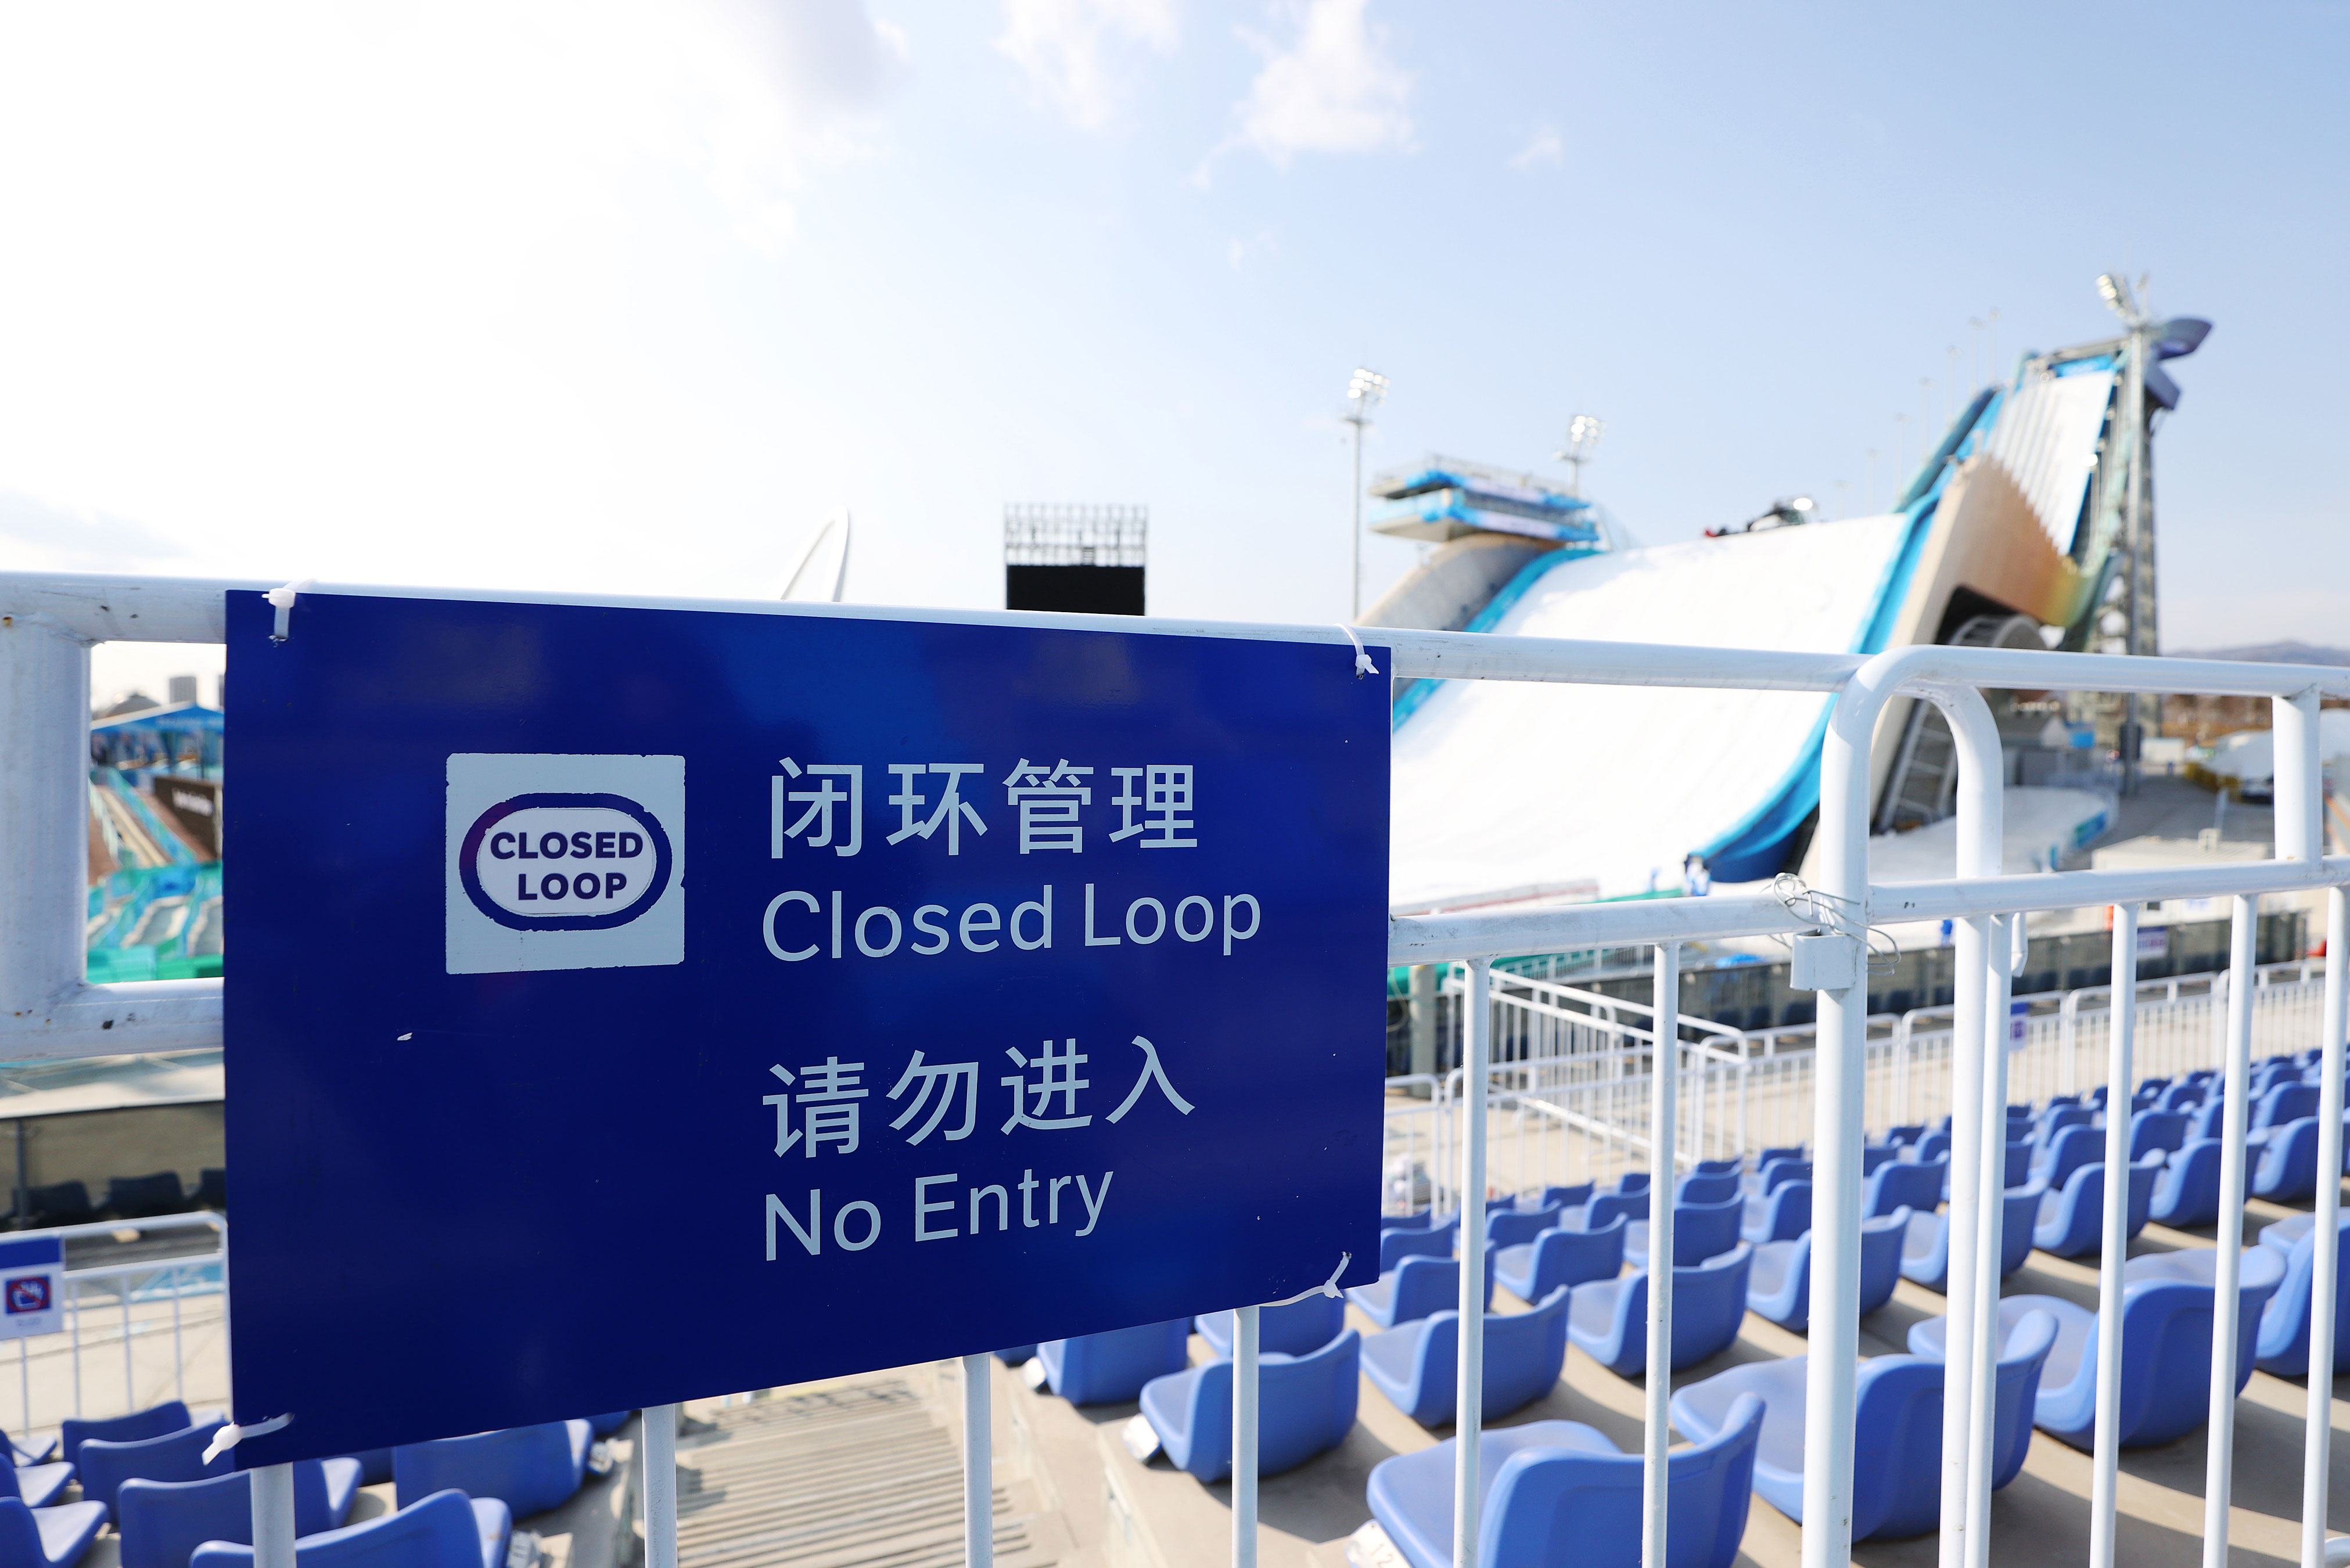 A "Closed loop, No Entry" sign is seen in the stands at the Big Air course ahead of the Beijing 2022 Winter Olympic Games at the National Ski Jumping Centre on January 31.